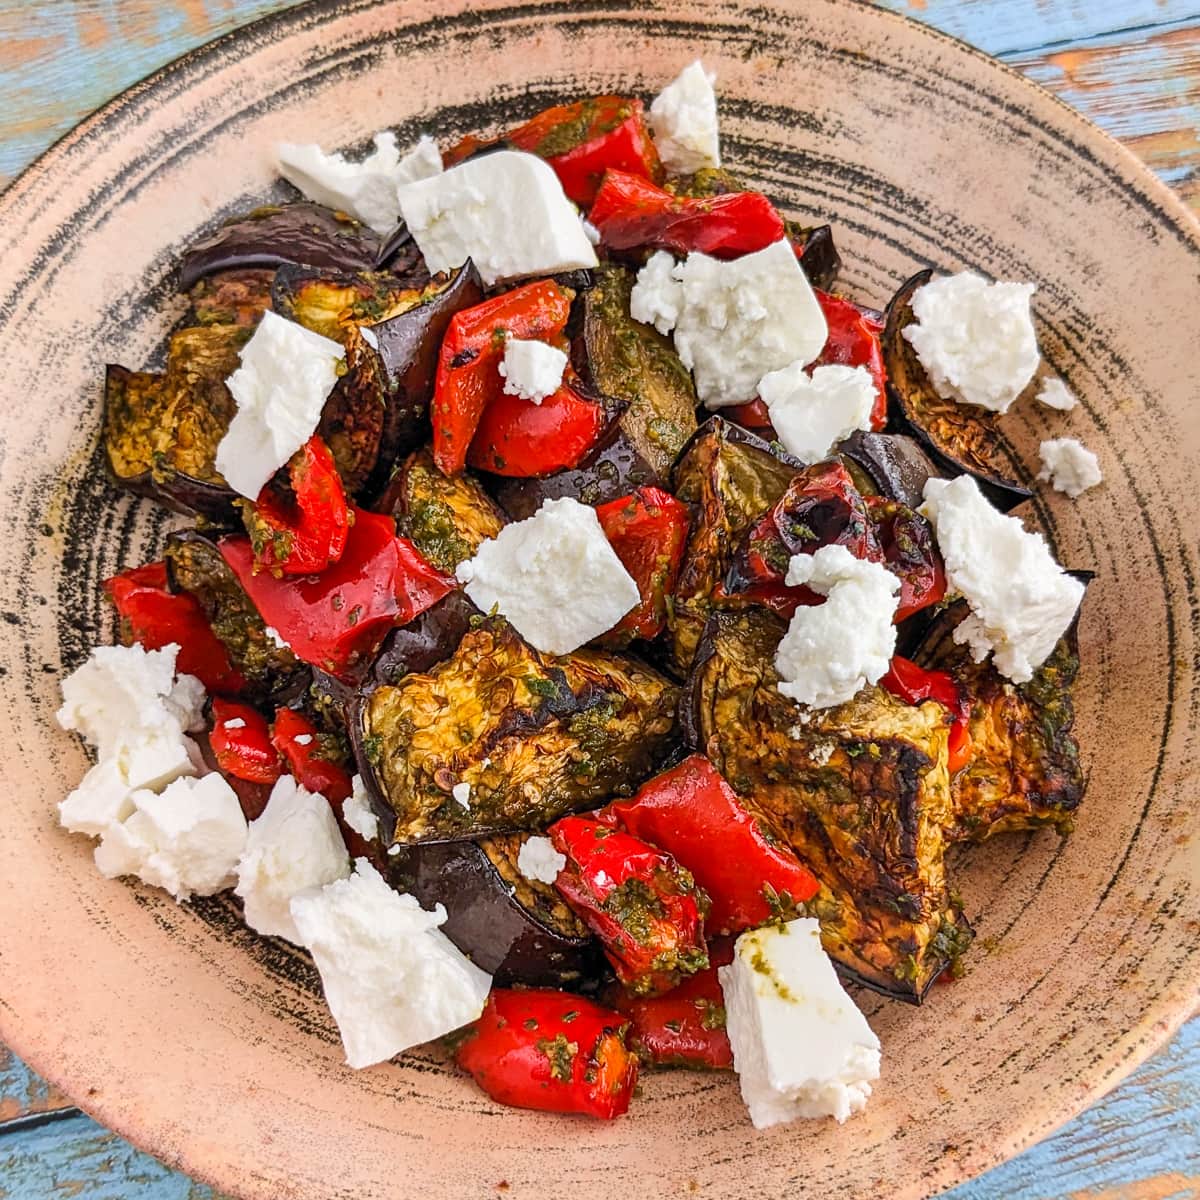 Rustic plate with eggplant, bell peppers and feta cheese salad.